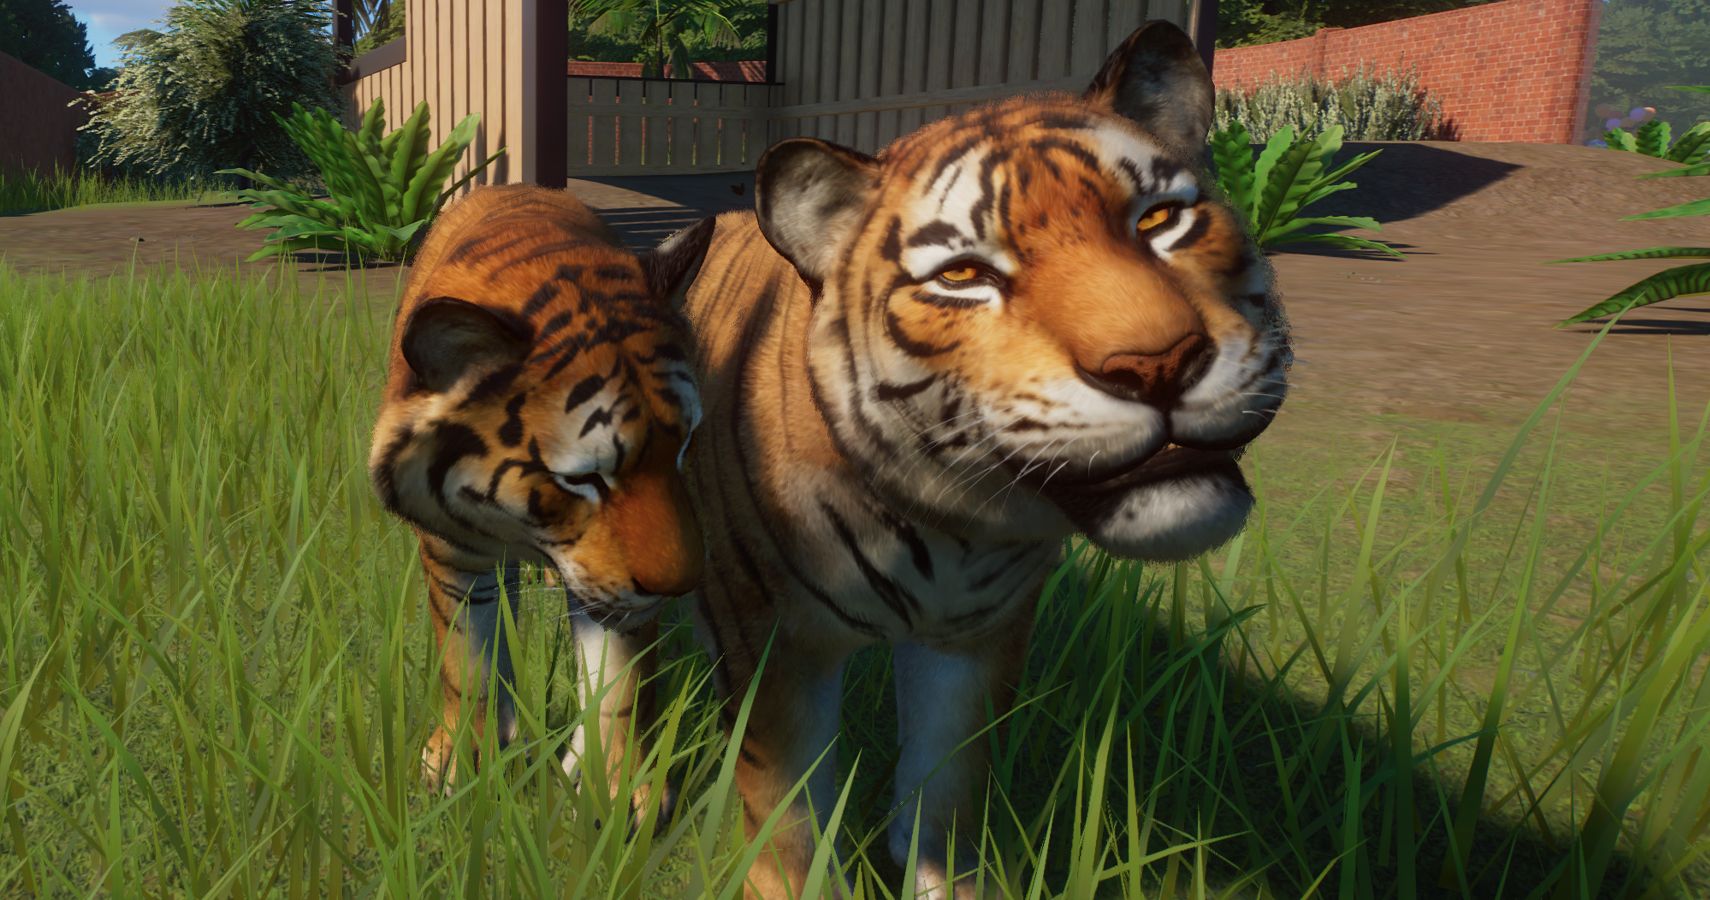 Planet Zoo: A Beginner's Guide To Starting A Zoo From Scratch